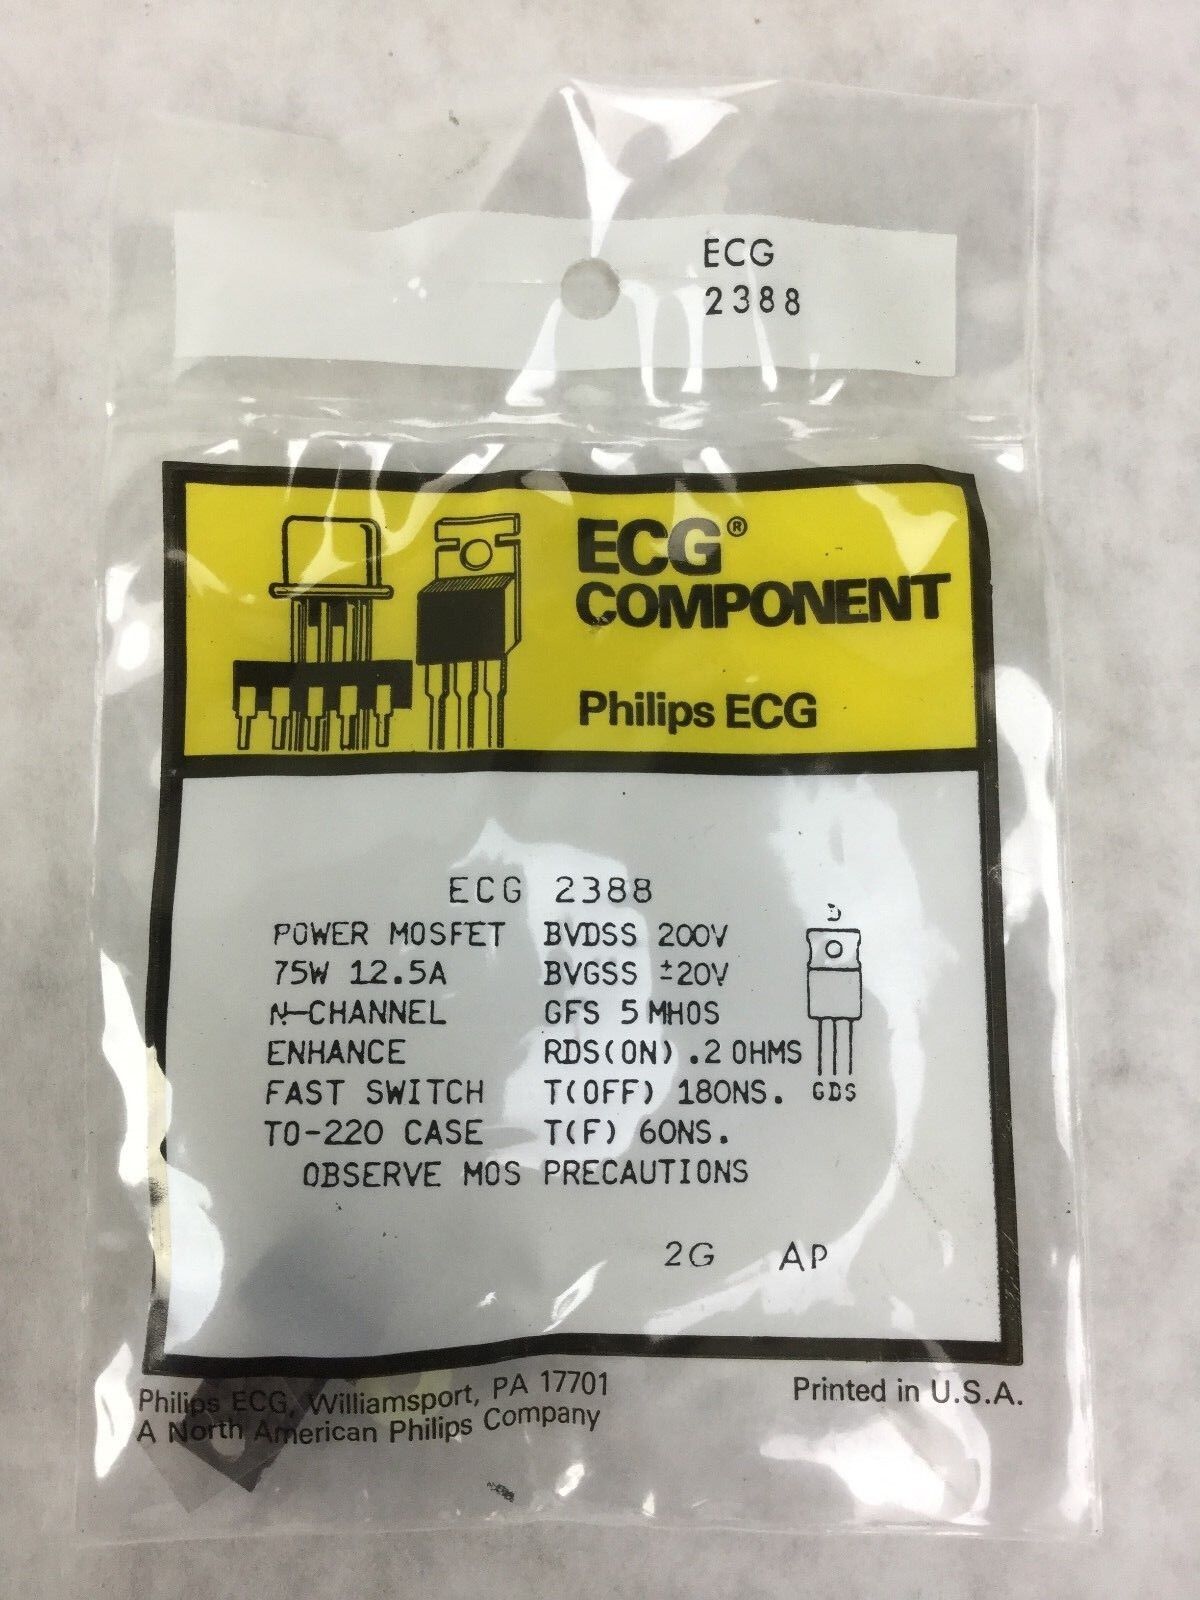 Philips ECG 2388 Transistor, PWR MOSFET, 75W 12.5A, NEW SEALED